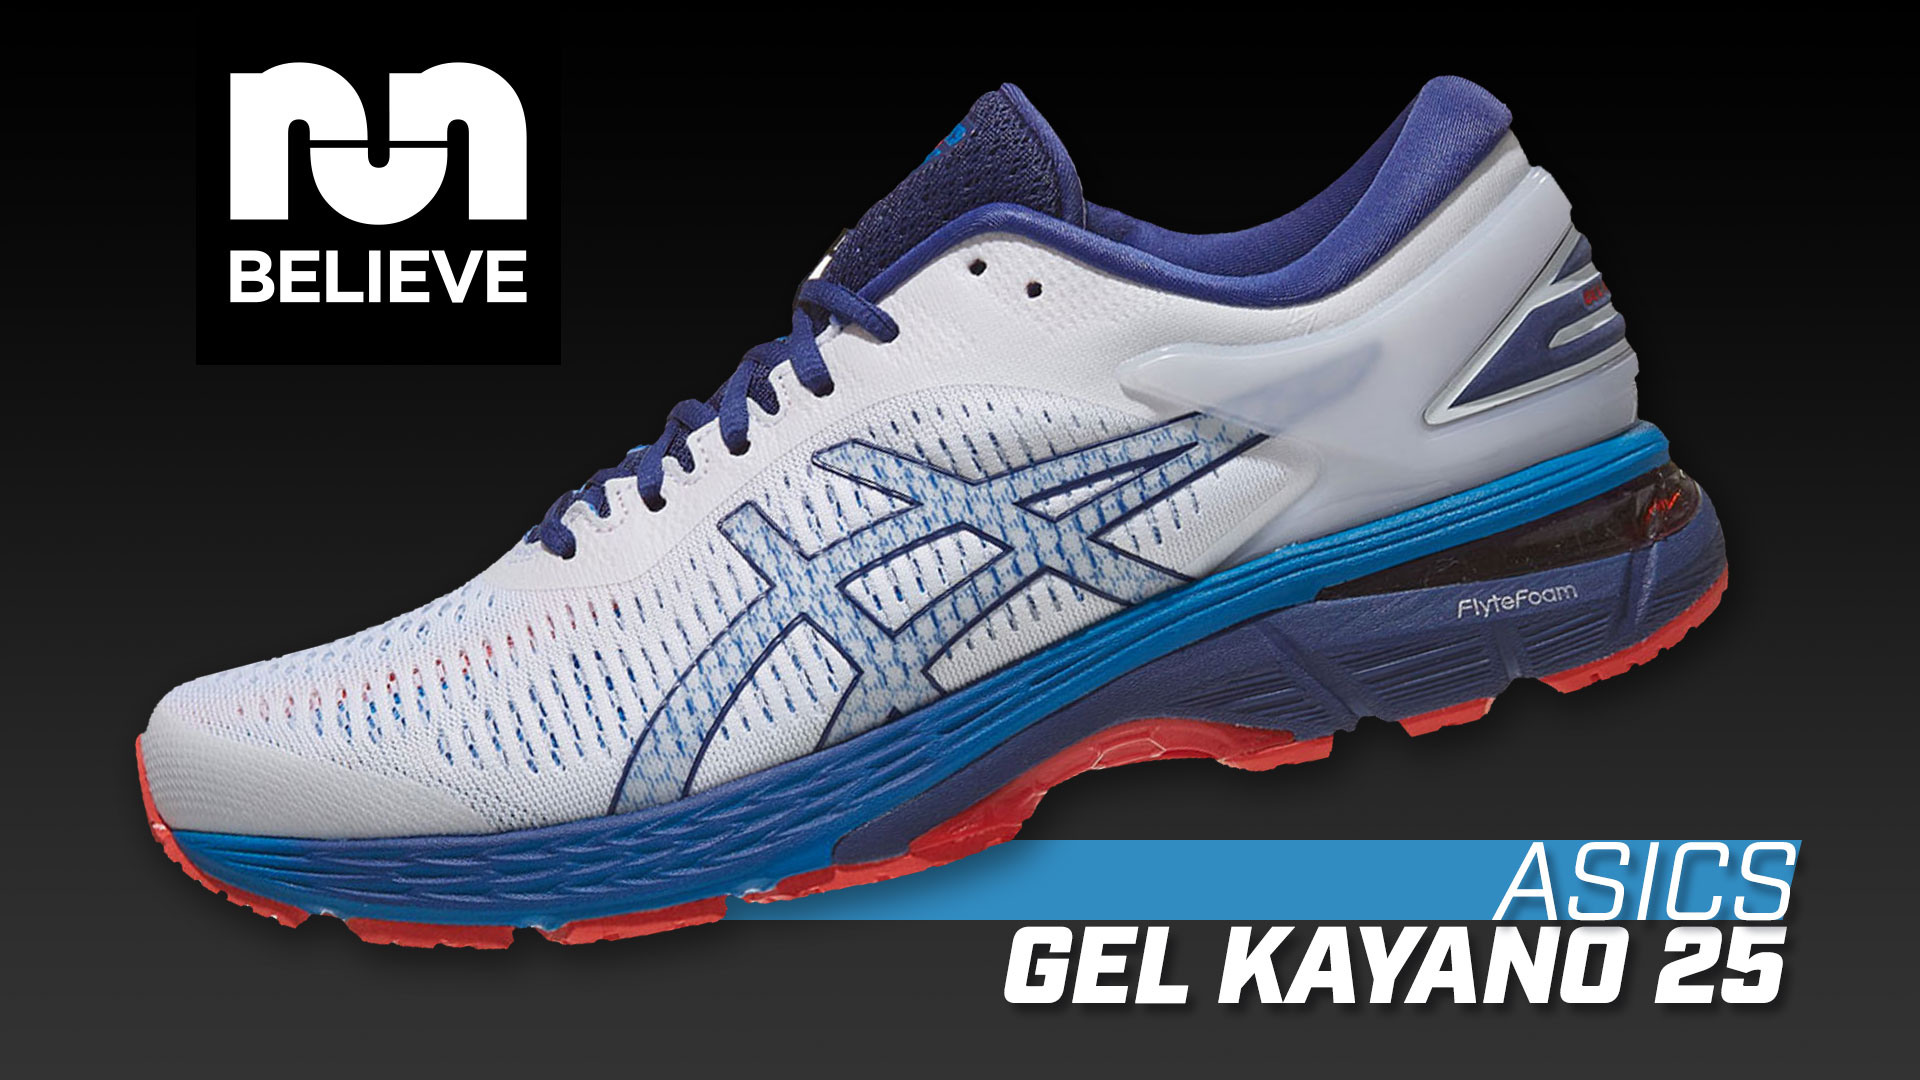 Asics Gel Kayano 25 Video Performance Review - Believe in the Run